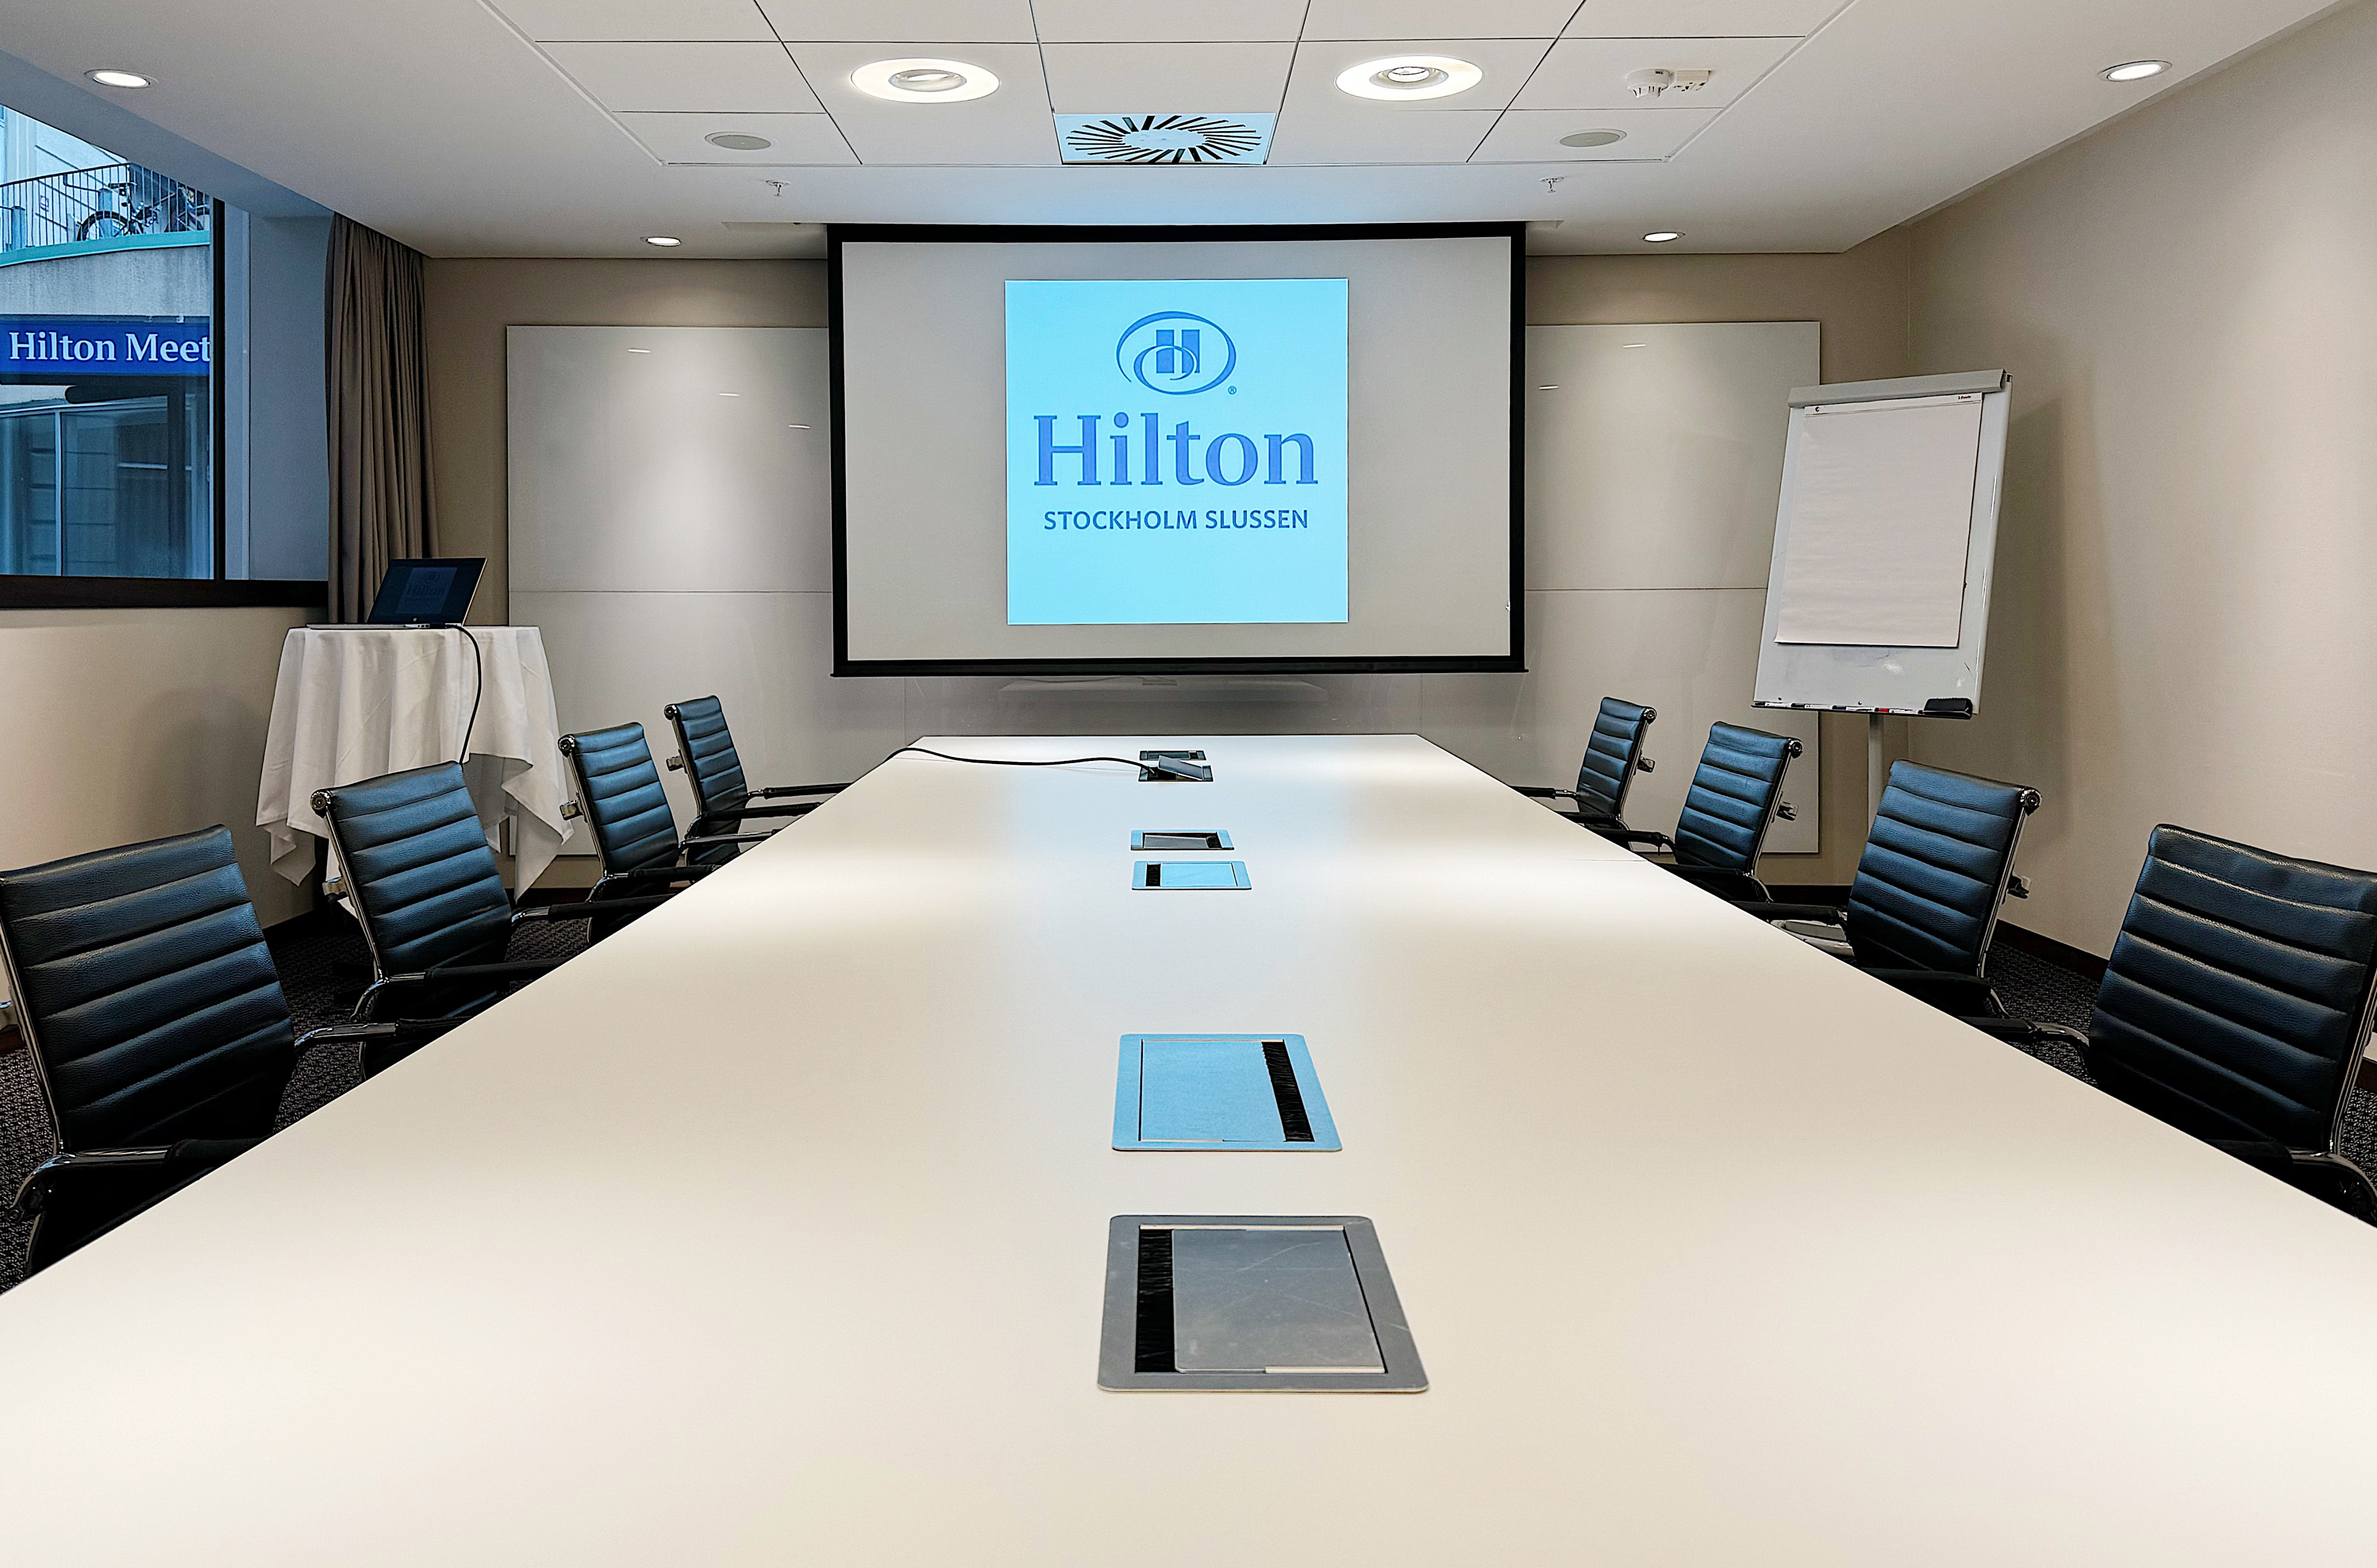 Afrodite Meeting Room with a Projection Screen